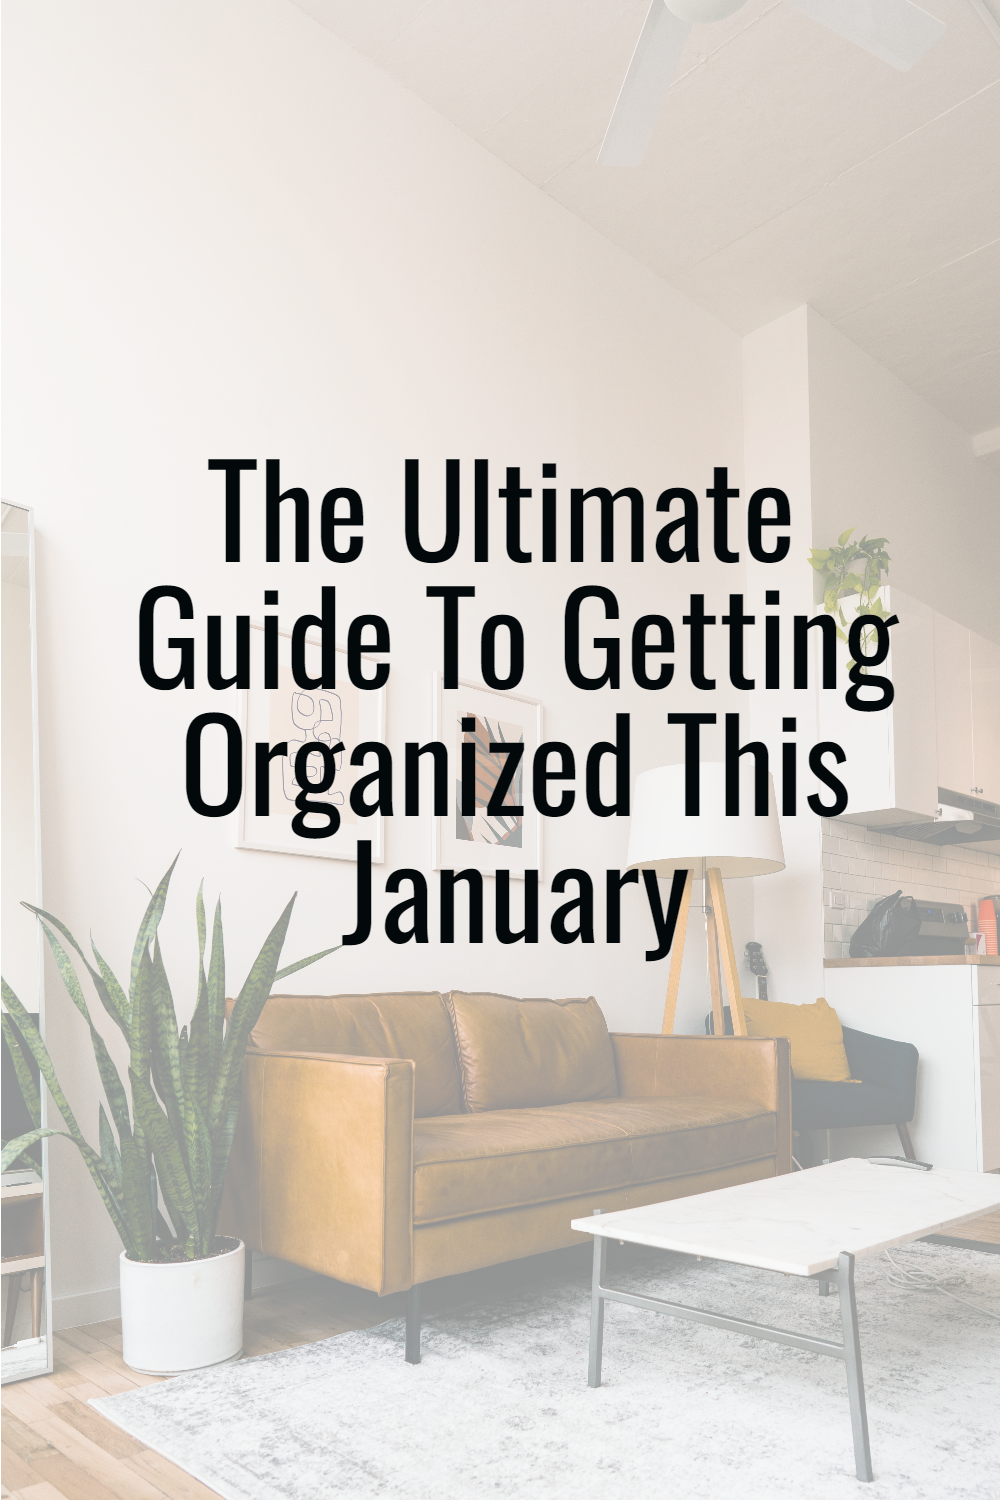 Thinking about getting organized this January? Check out and download these resources to help you organize paper, kitchen, photos, and more!